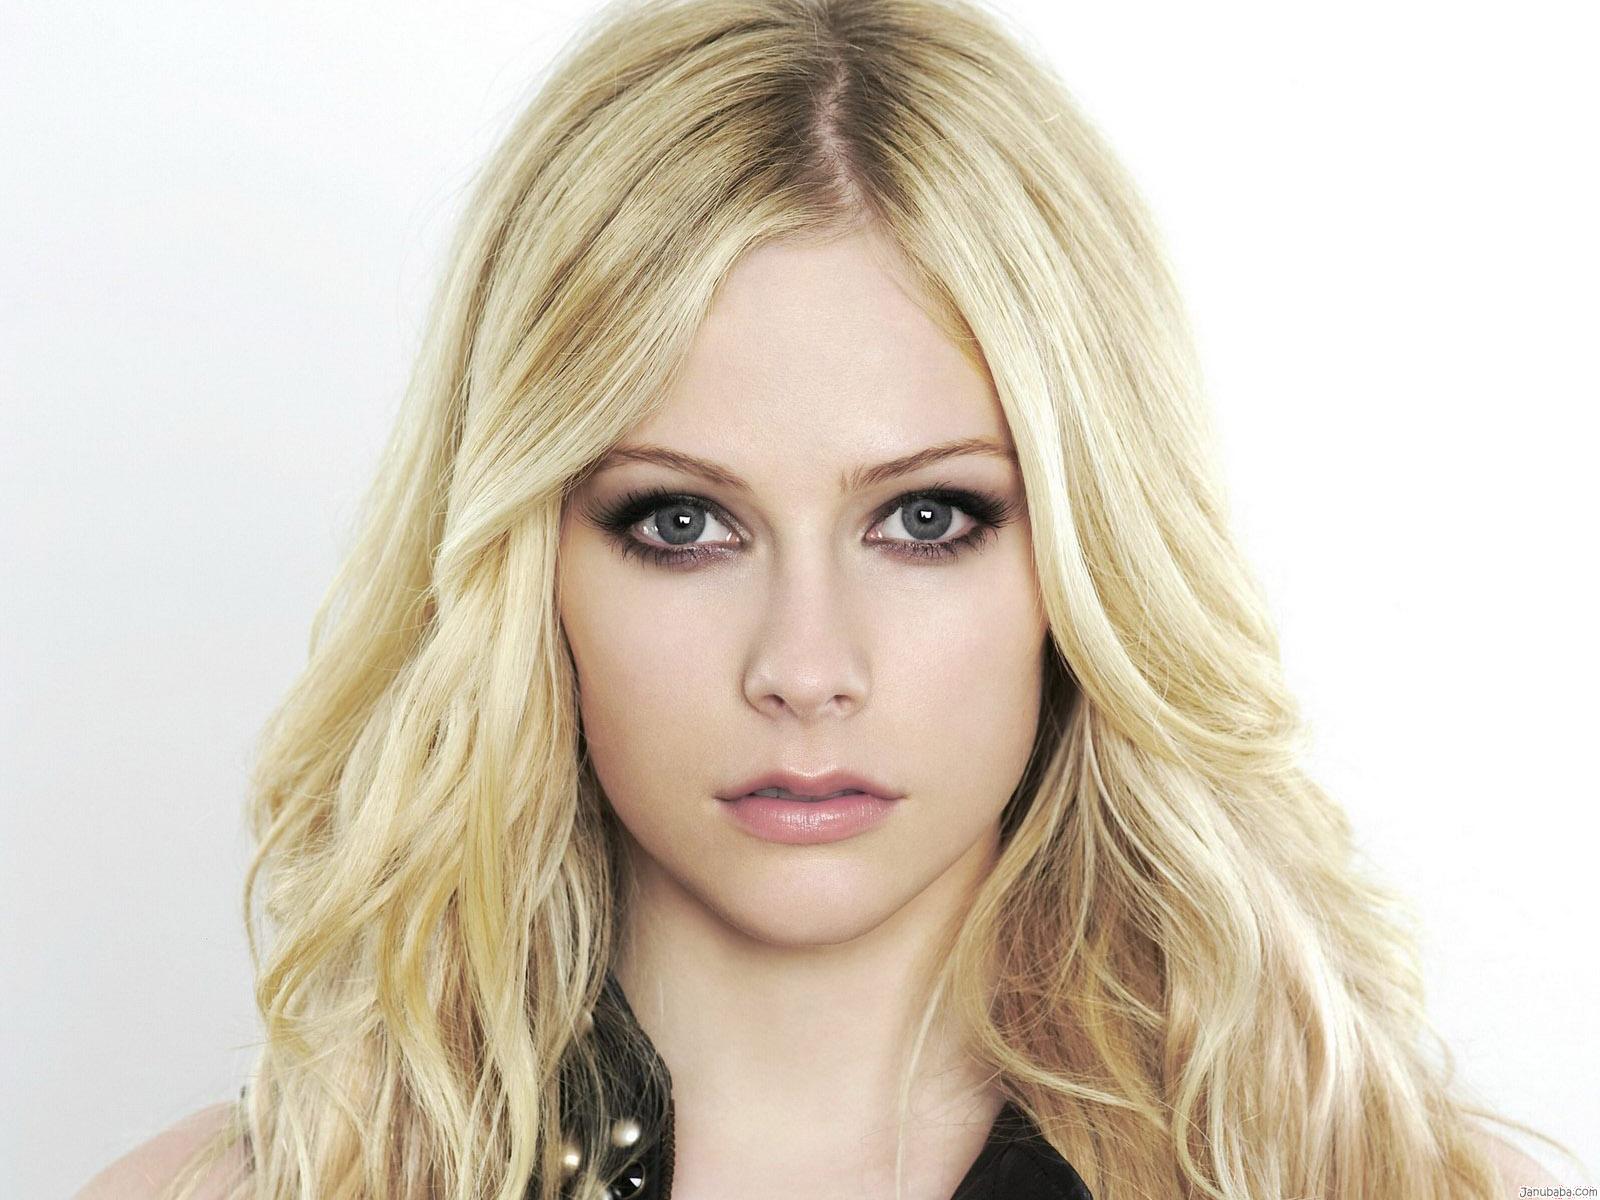 Amazing Avril Lavigne Pictures & Backgrounds